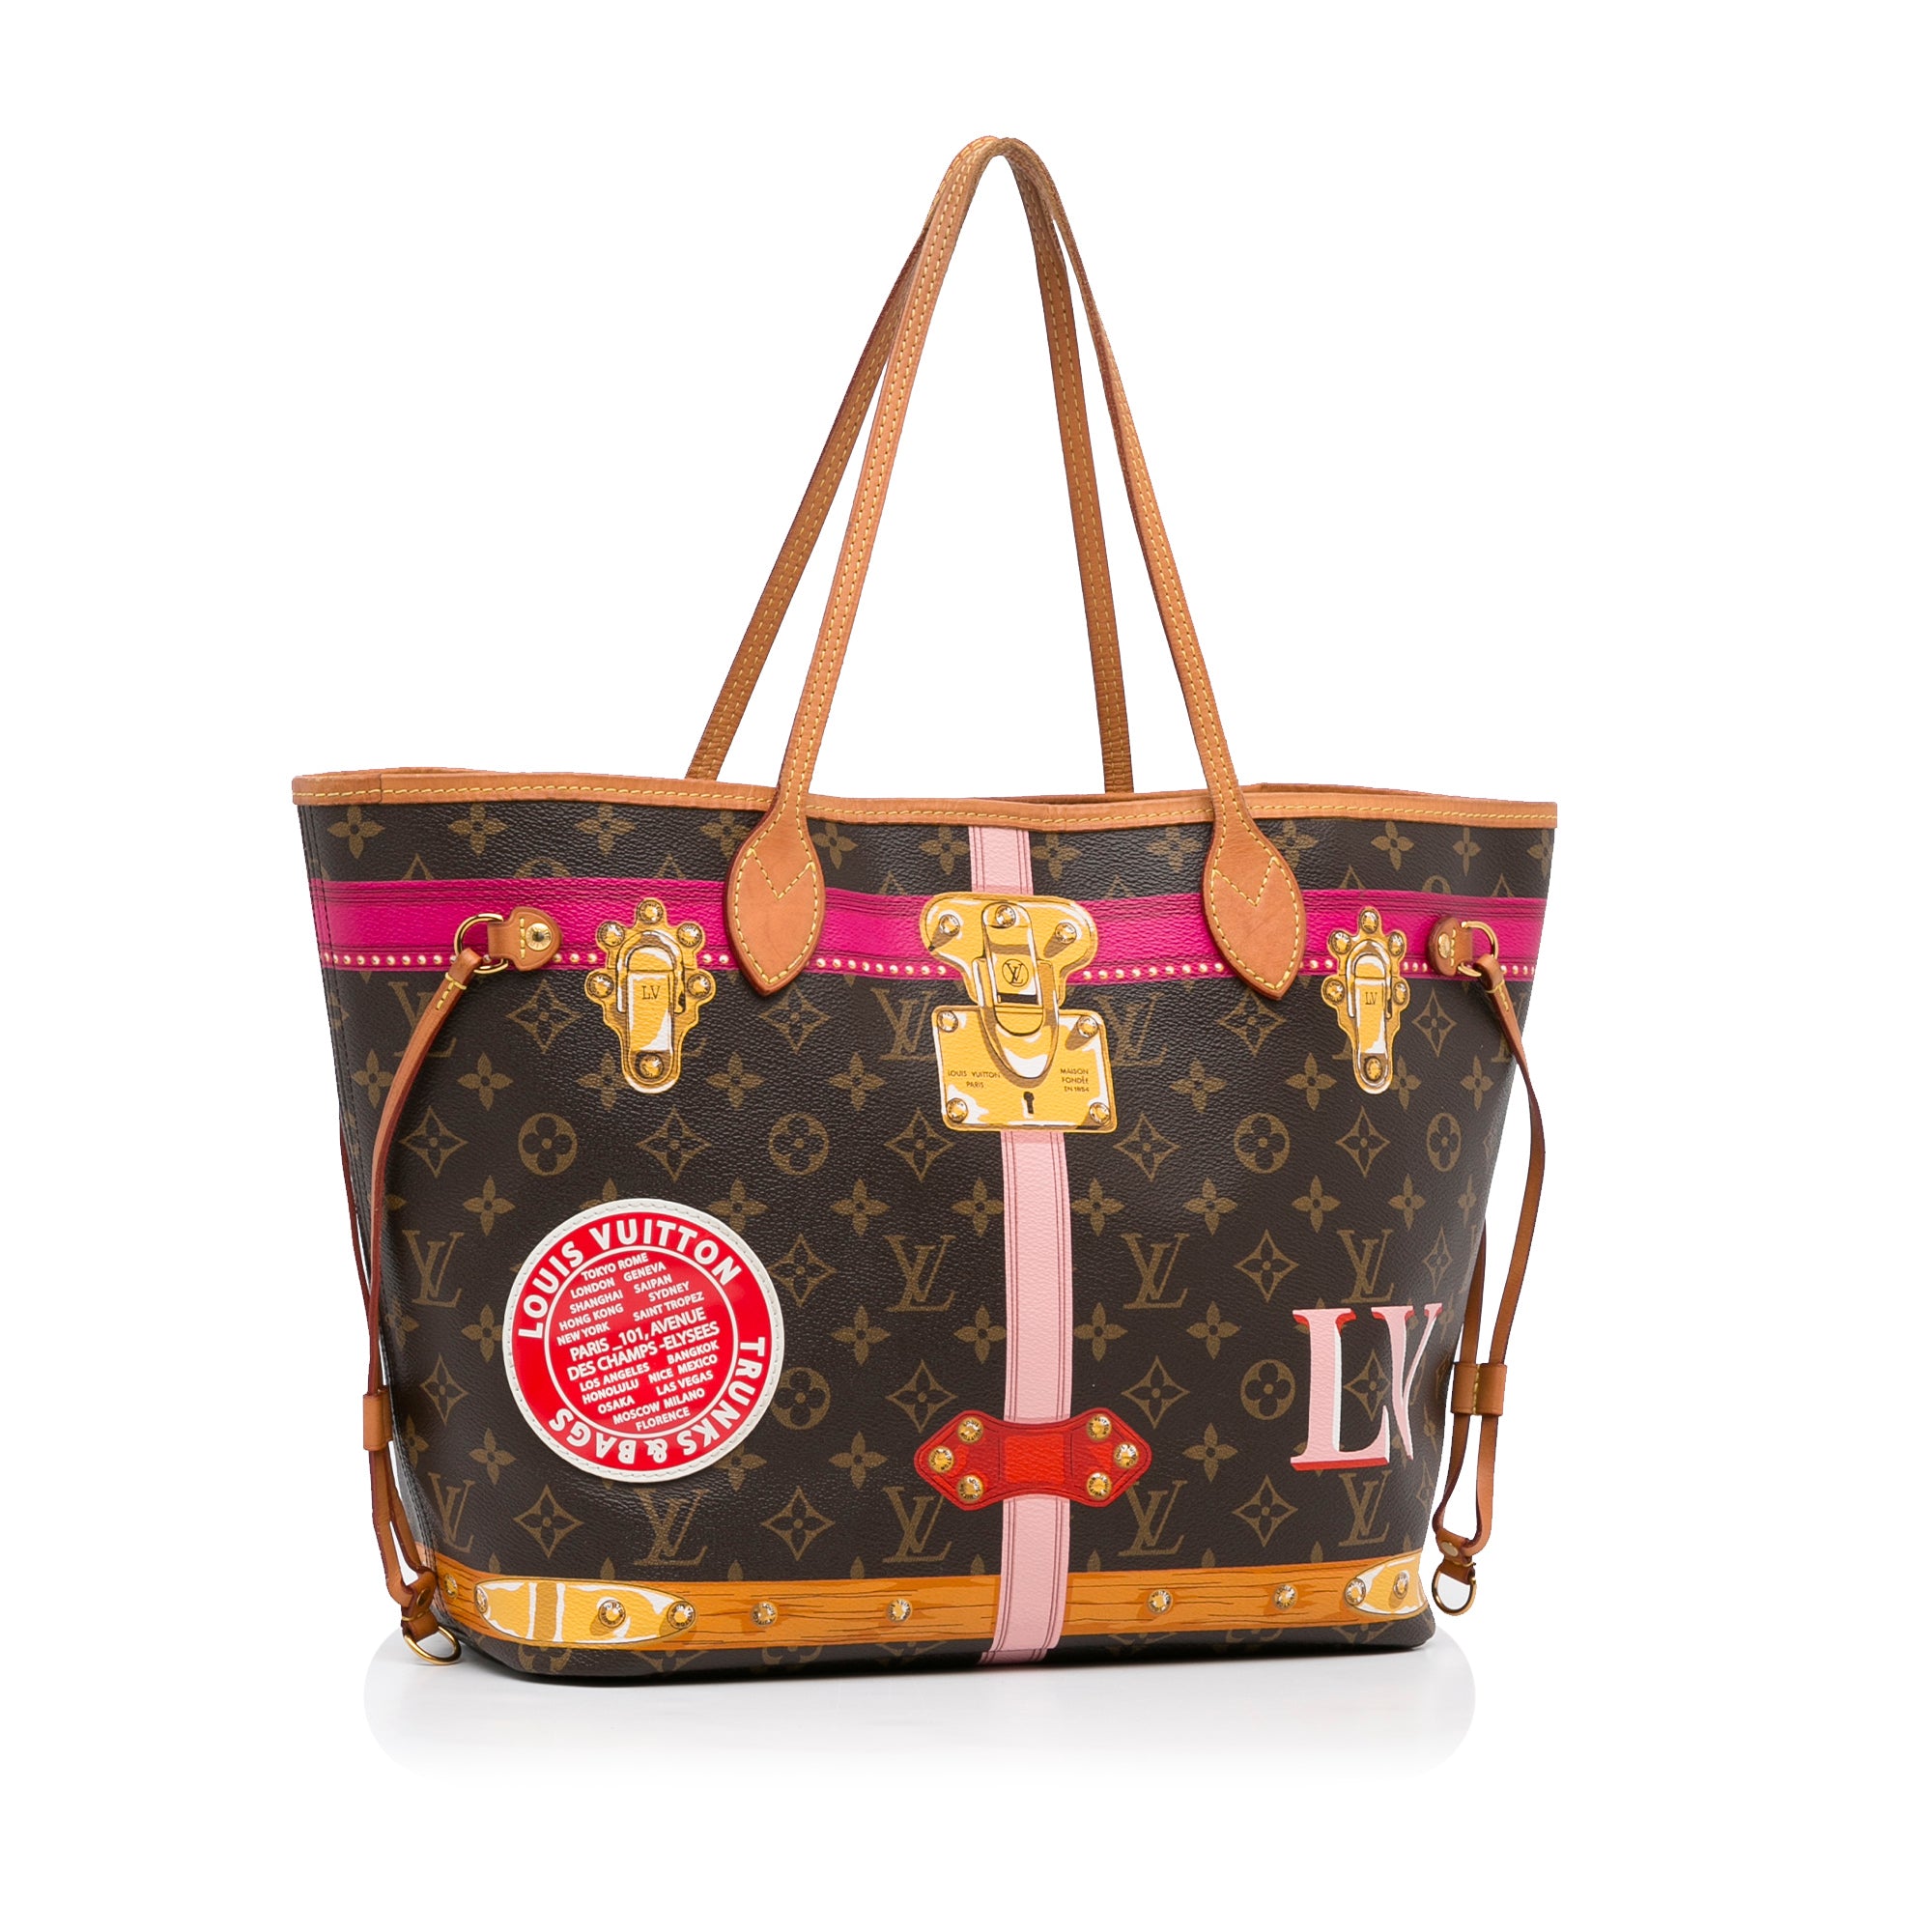 Louis Vuitton Neverfull Bags for sale in New York, New York